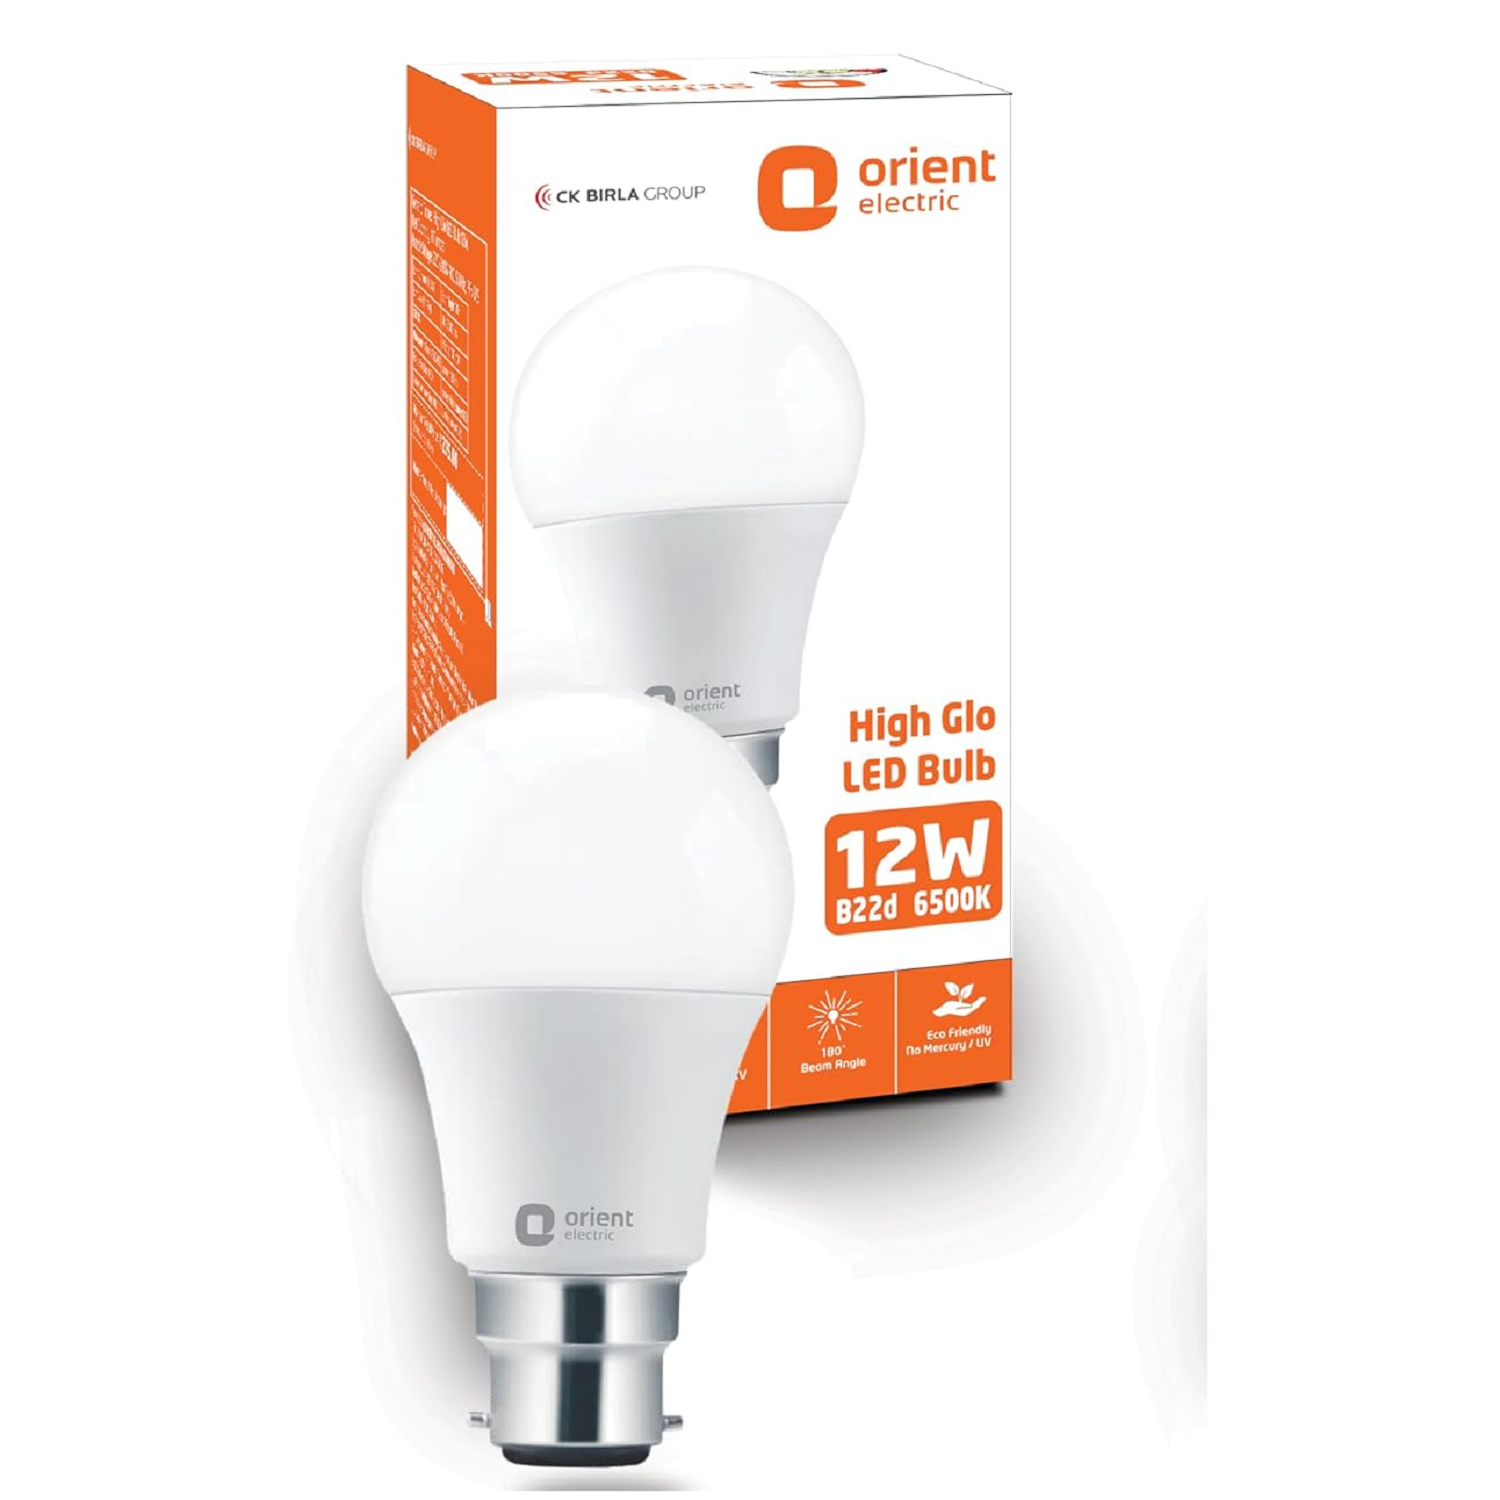 Orient 12W Electric High Glo LED Bulb